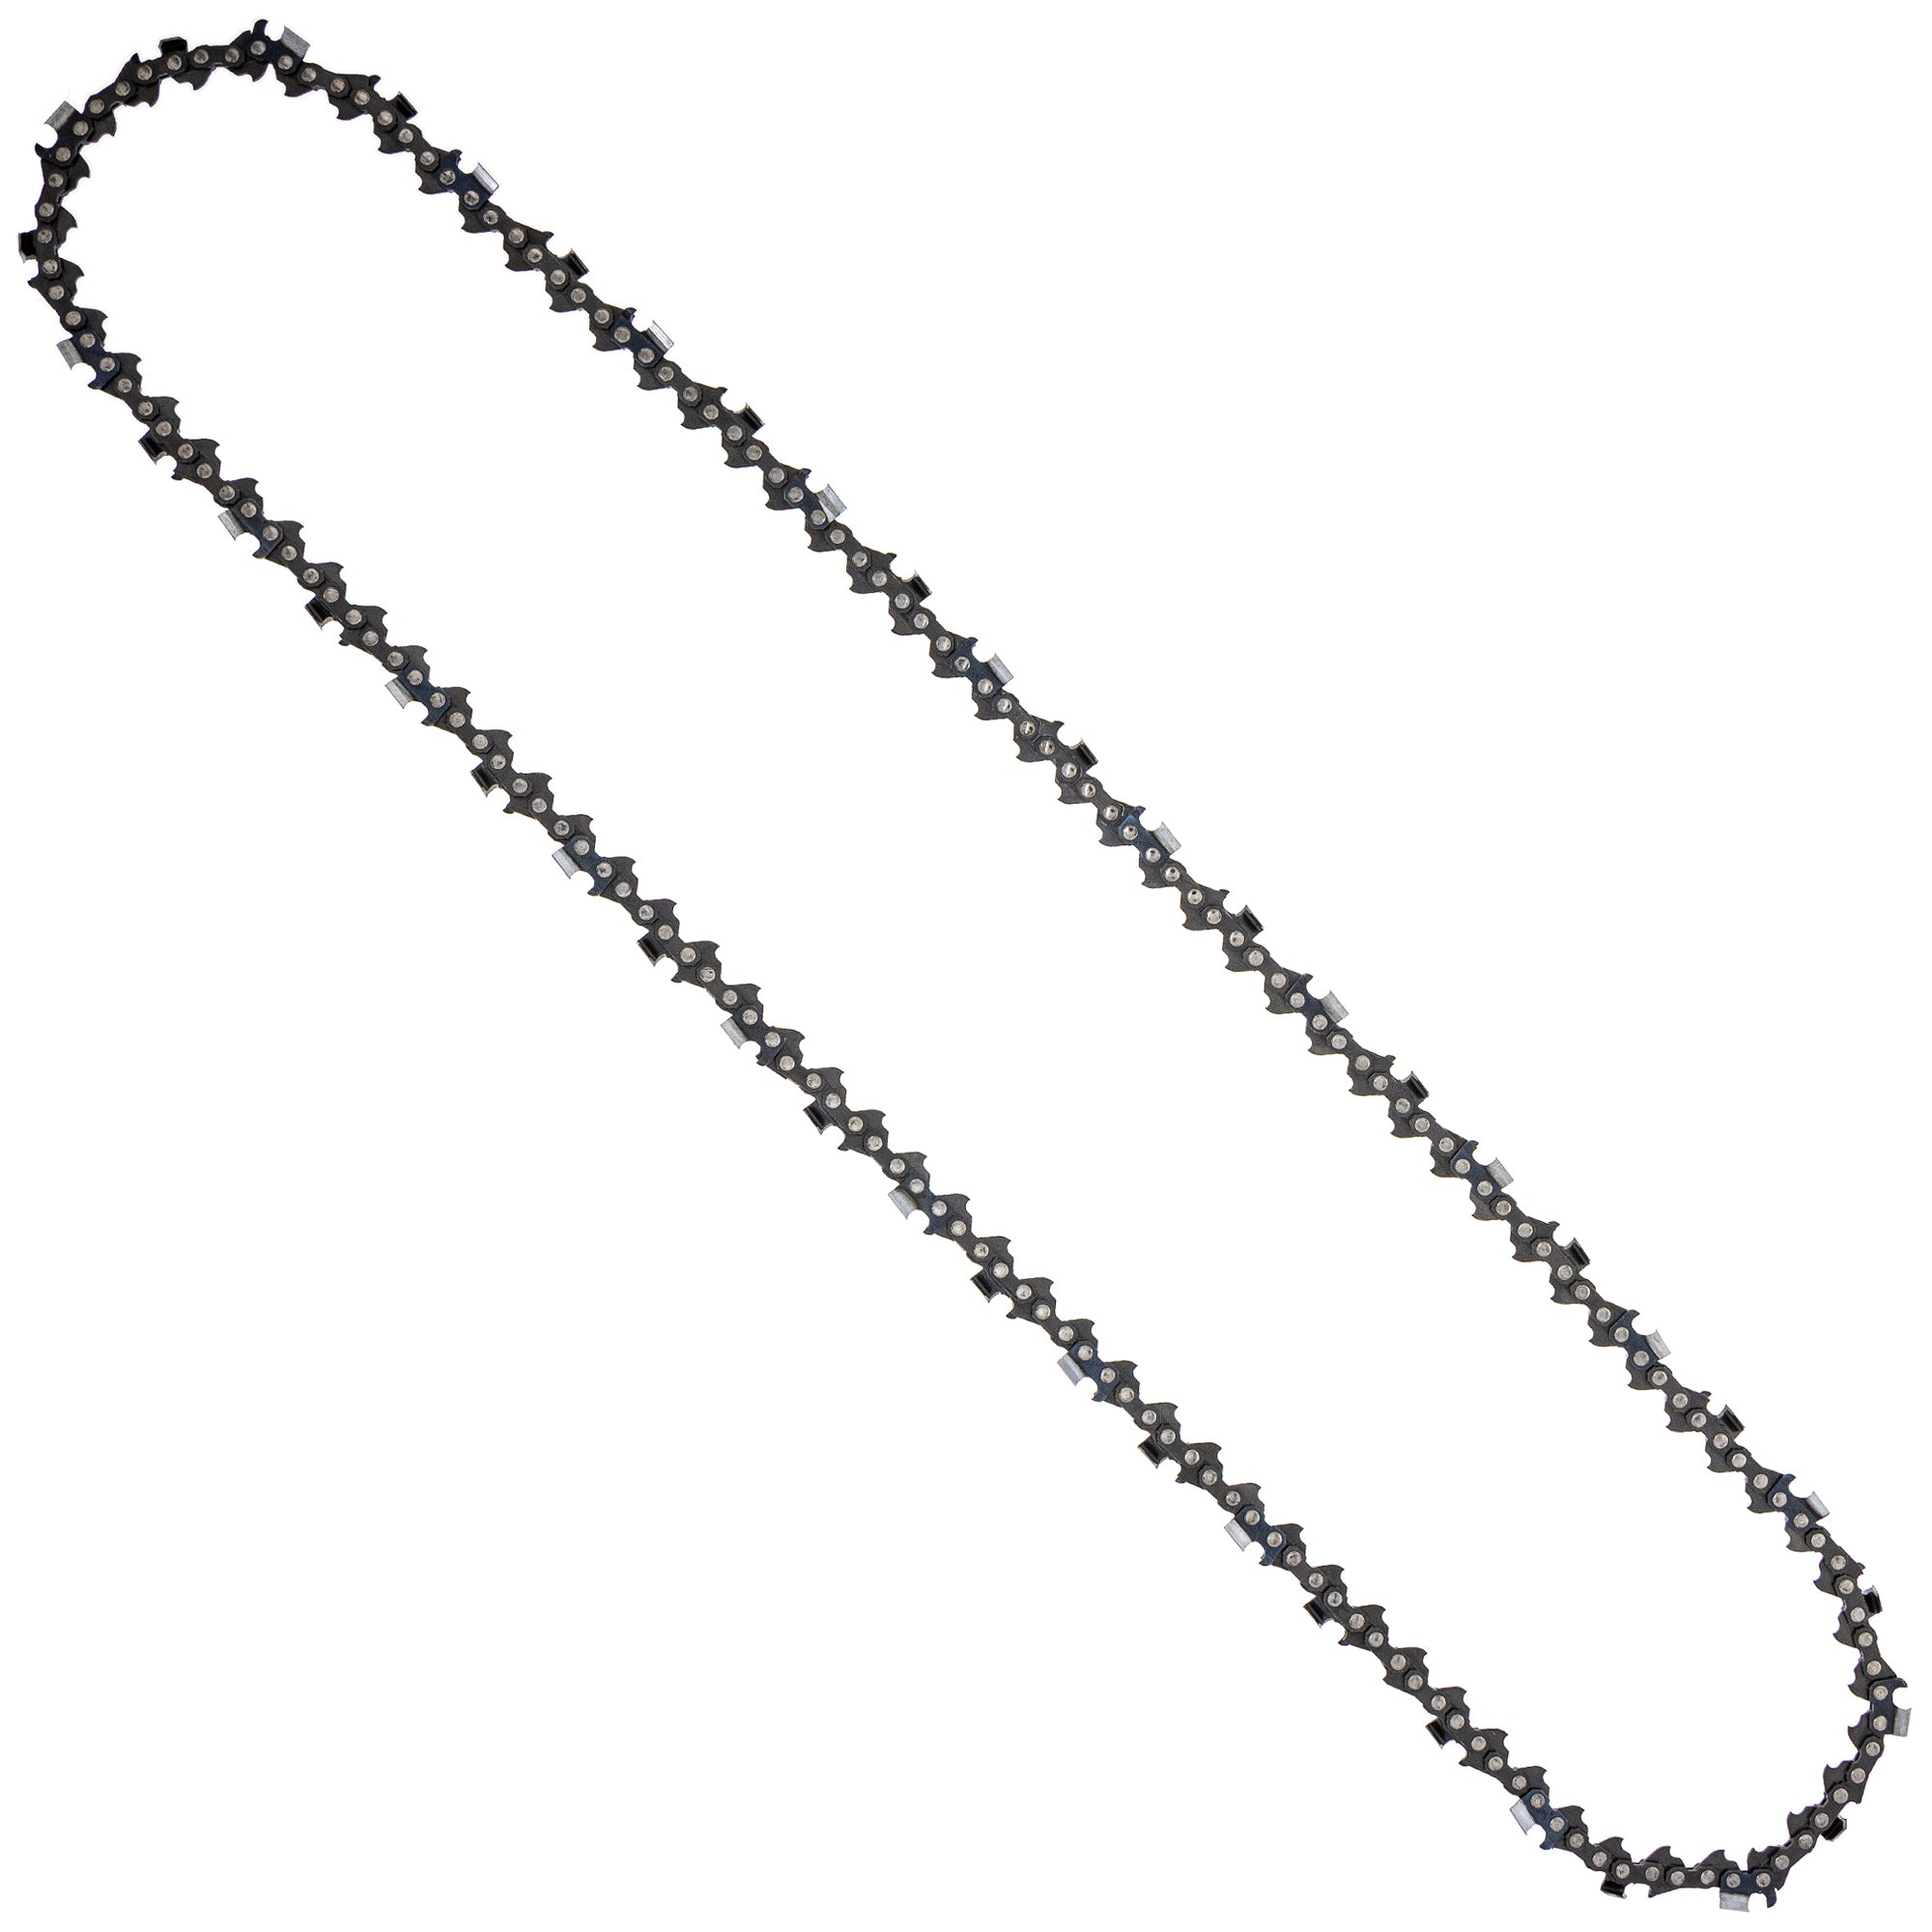 8TEN 810-CCC2280H Chain 4-Pack for zOTHER Oregon MS 066 064 056